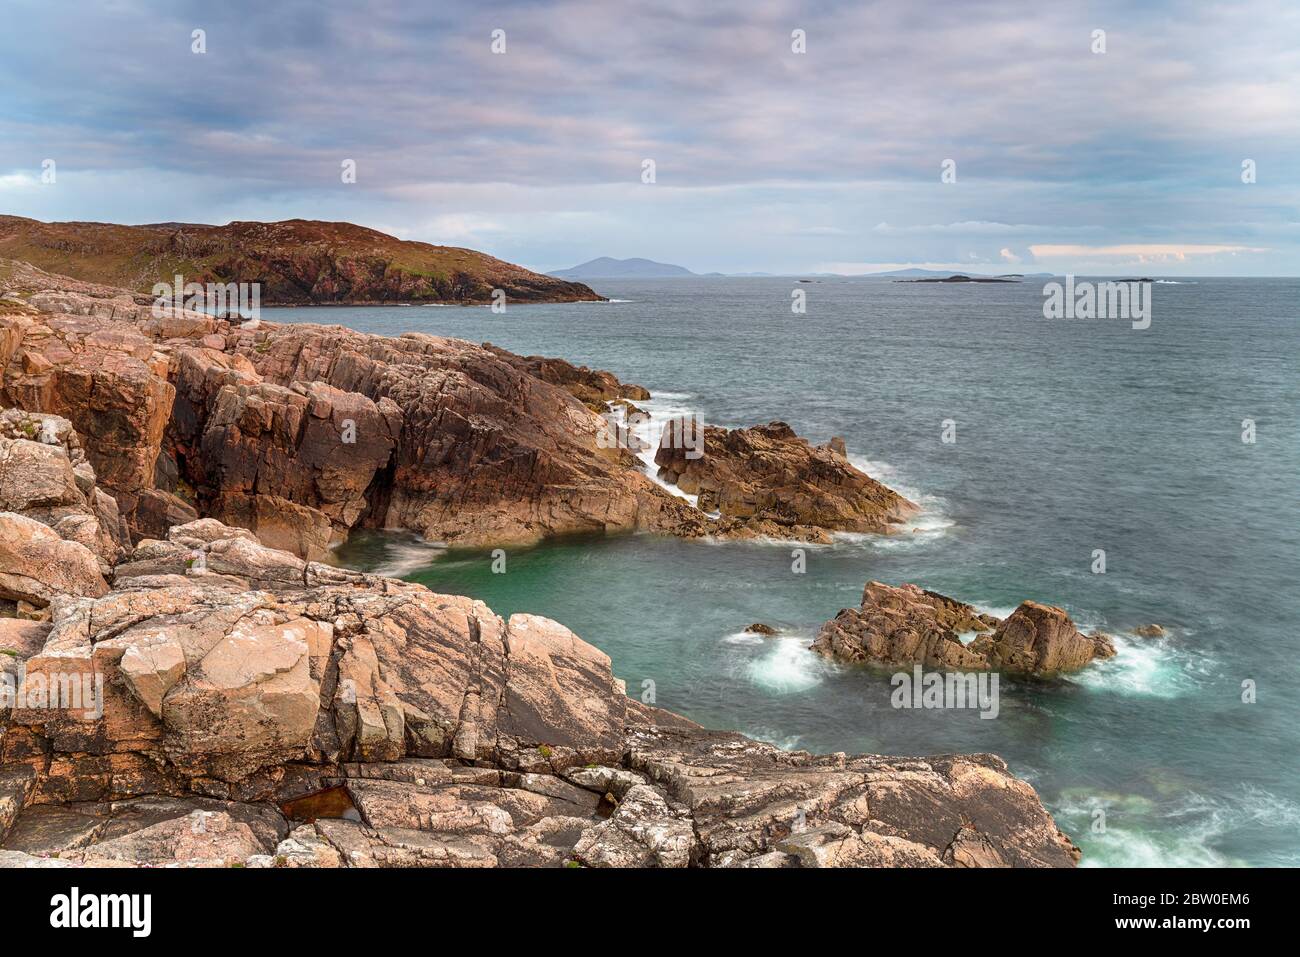 The wild and rugged coastline of the Isle of Harris at Hushinish in the Outer Hebrides of Scotland Stock Photo